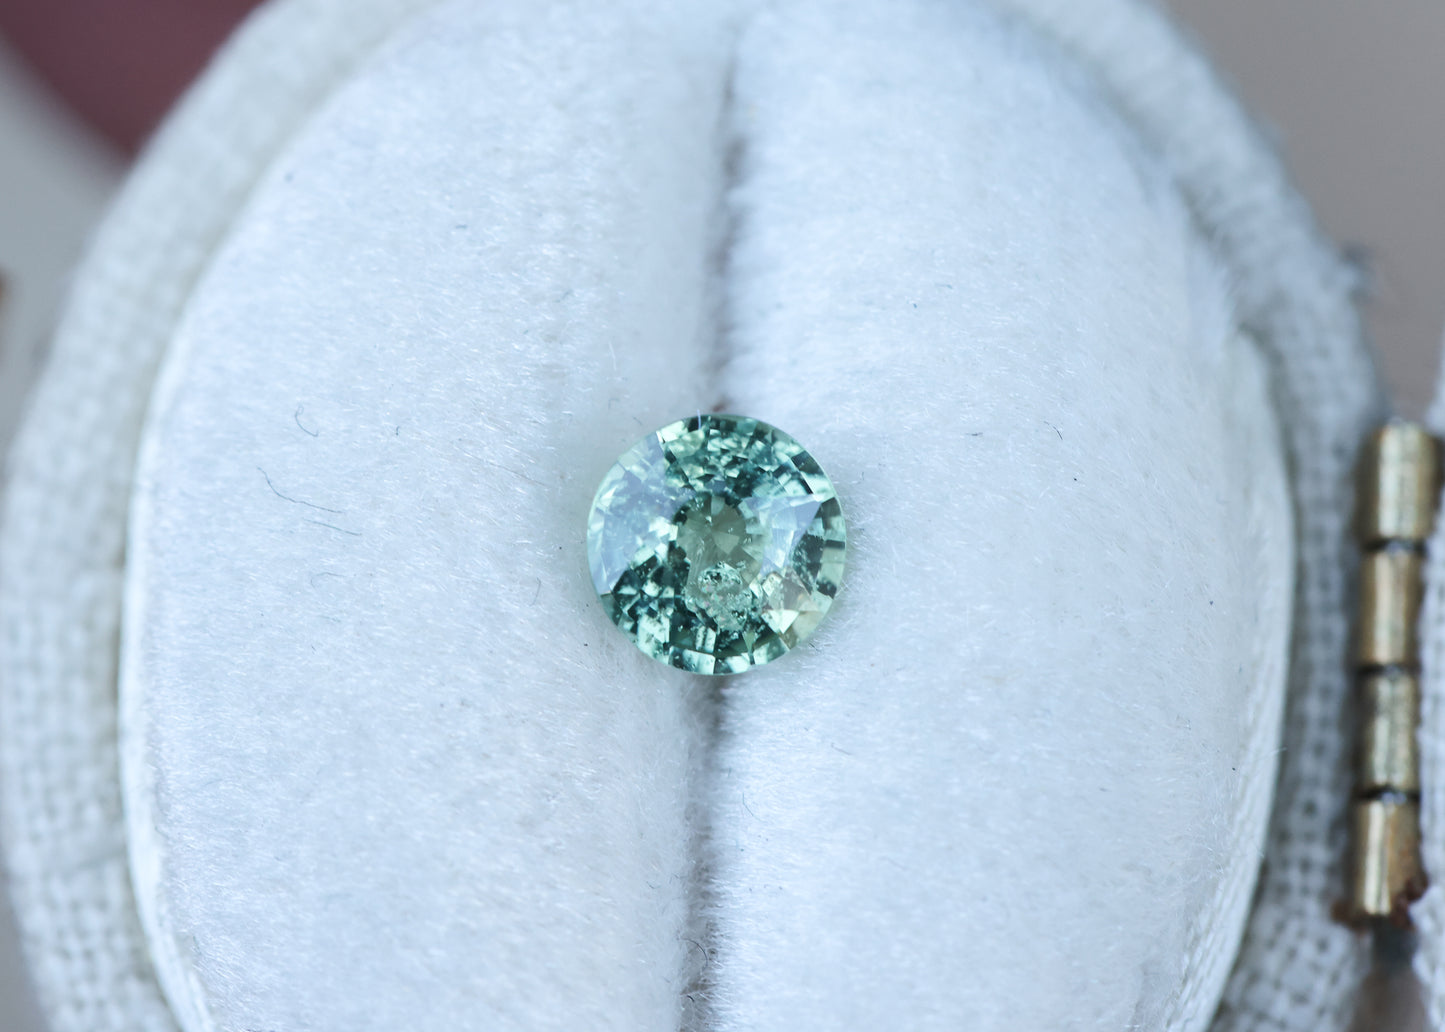 .66ct green teal round sapphire